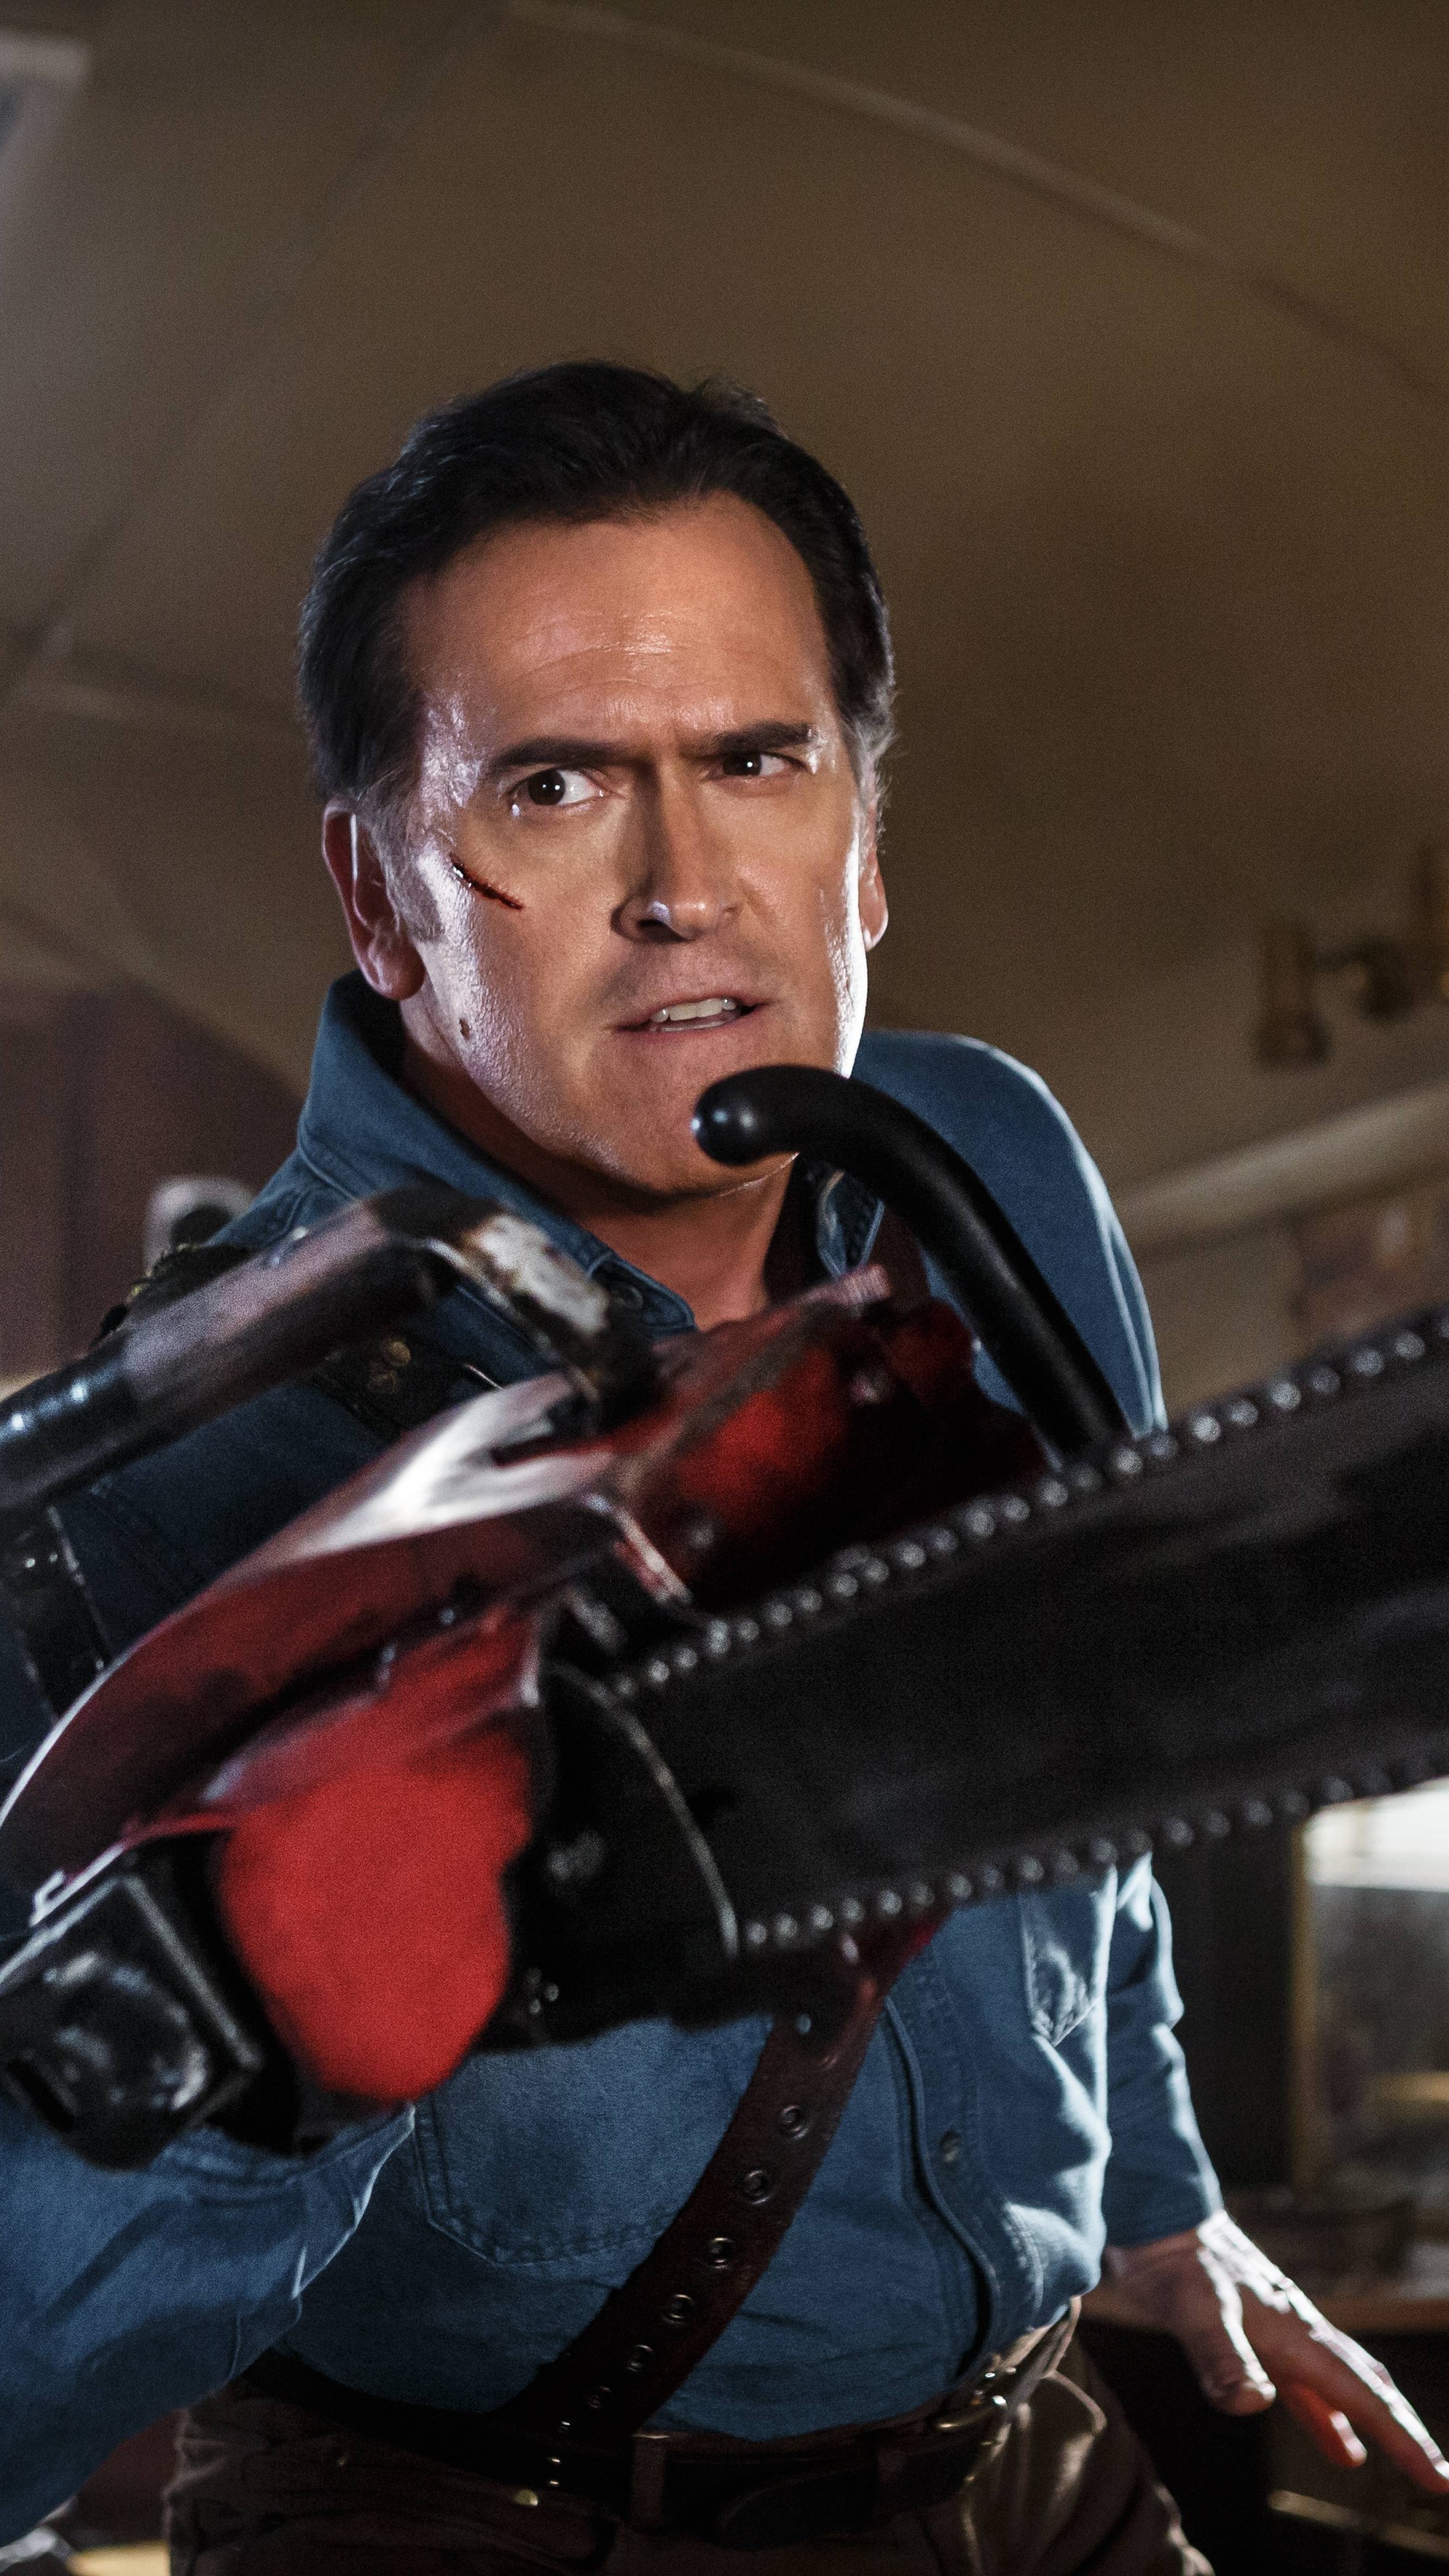 Bruce Campbell: Ash Williams, A fictional character and the protagonist of the Evil Dead franchise. 2160x3840 4K Wallpaper.